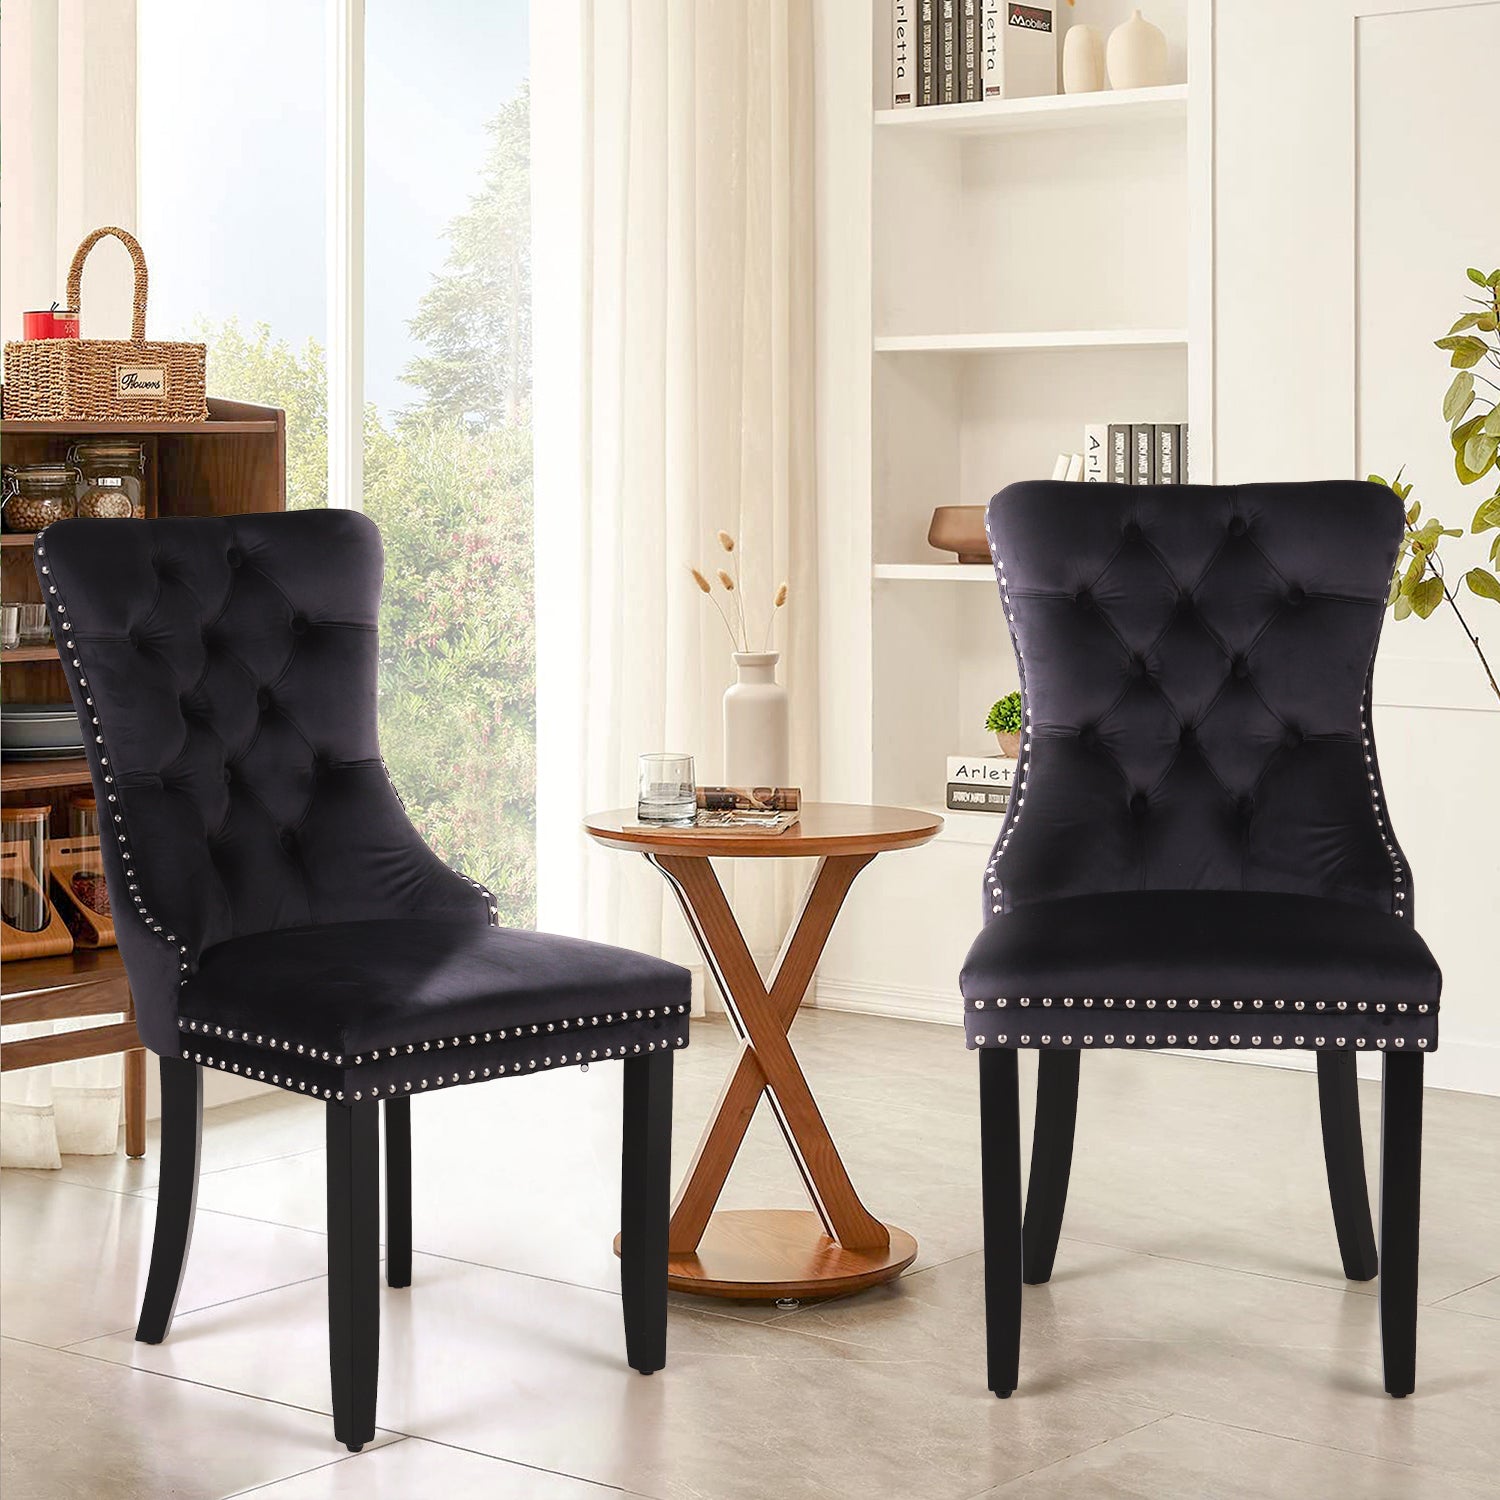 PHI VILLA Velvet Accent Dining Chairs with Solid Wood Legs, Set of 2